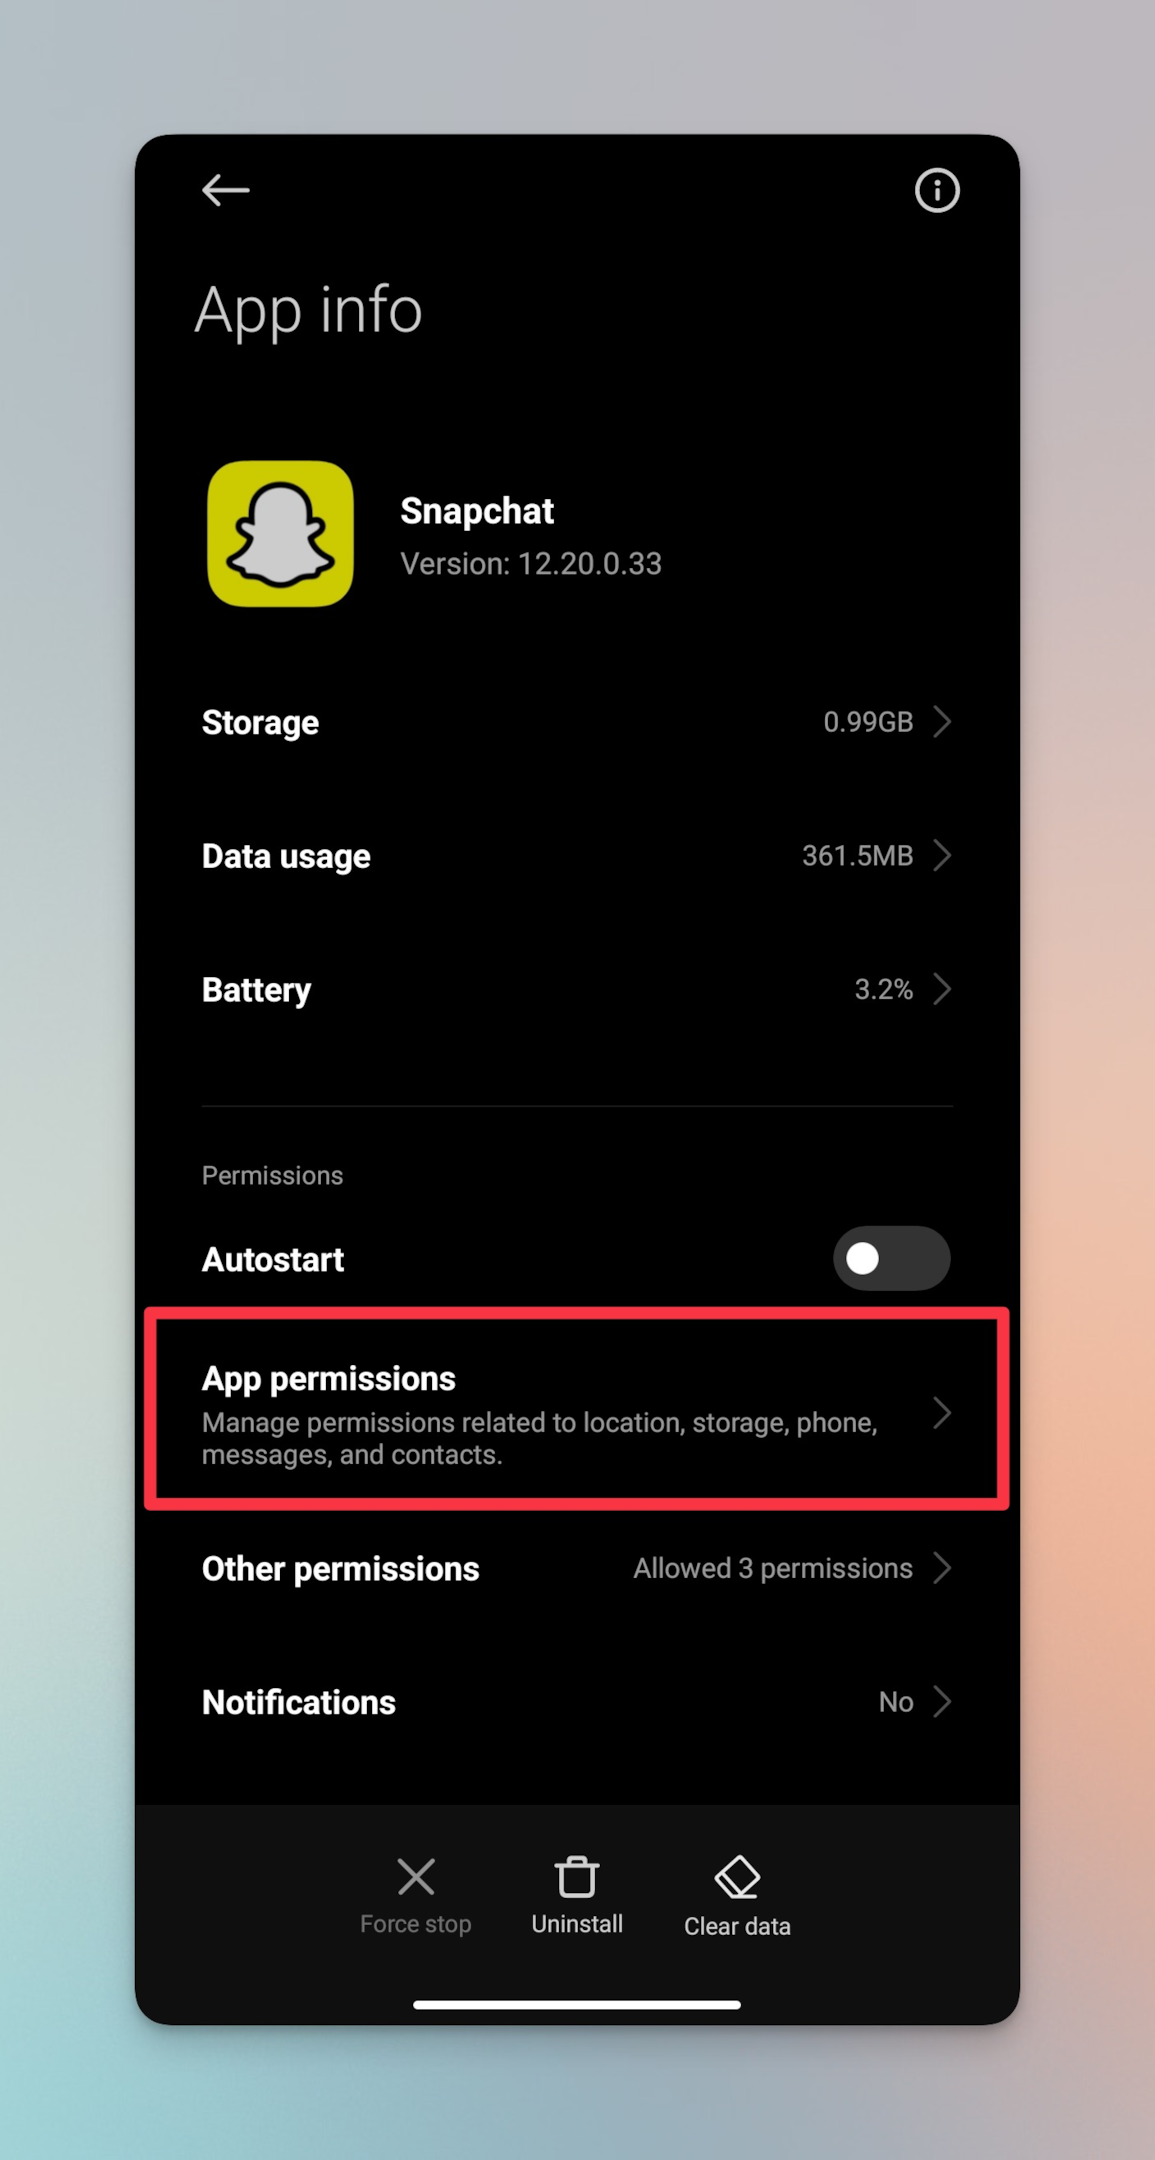 Remote.tools highlights App permision settings for Snapchat. You can configure snapchat privacy settings here.